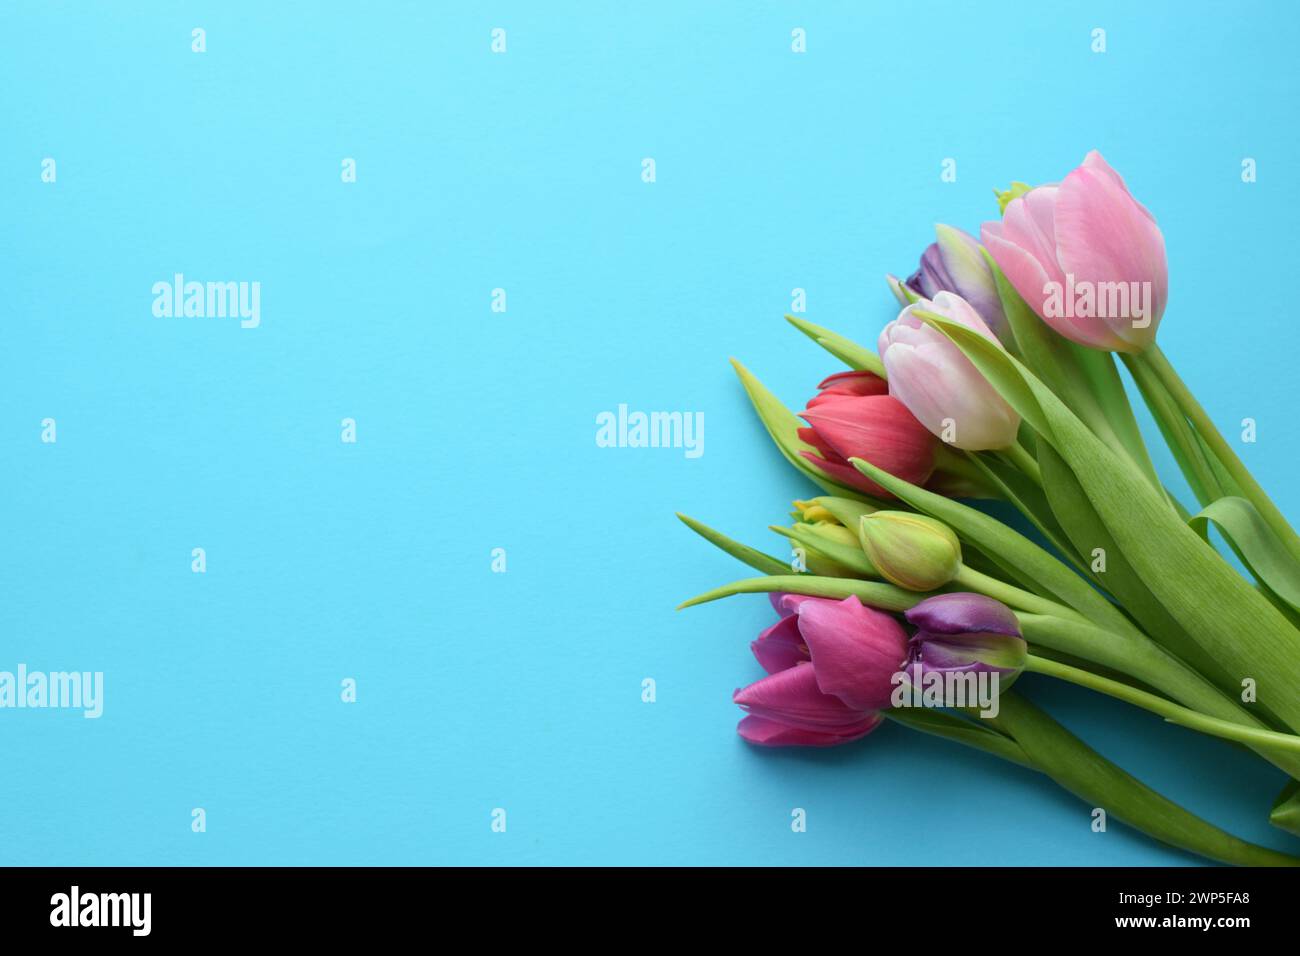 Bouquet of colorful spring tulips and place for text for Mother's Day or Women's Day on a blue background. Top view in flat style. Stock Photo